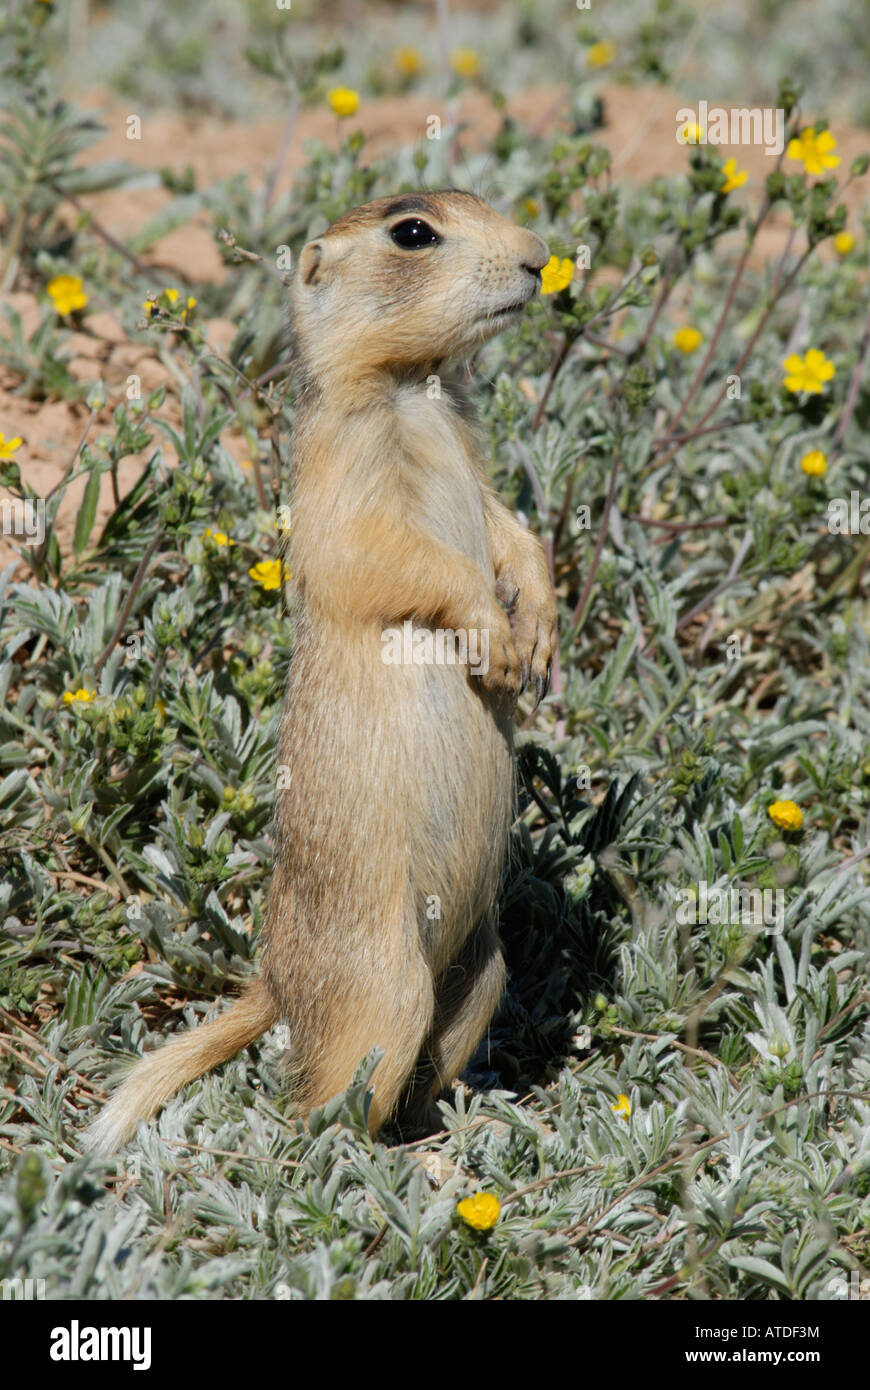 Stock photo of a young Utah prairie dog standing among yellow flowers. Stock Photo